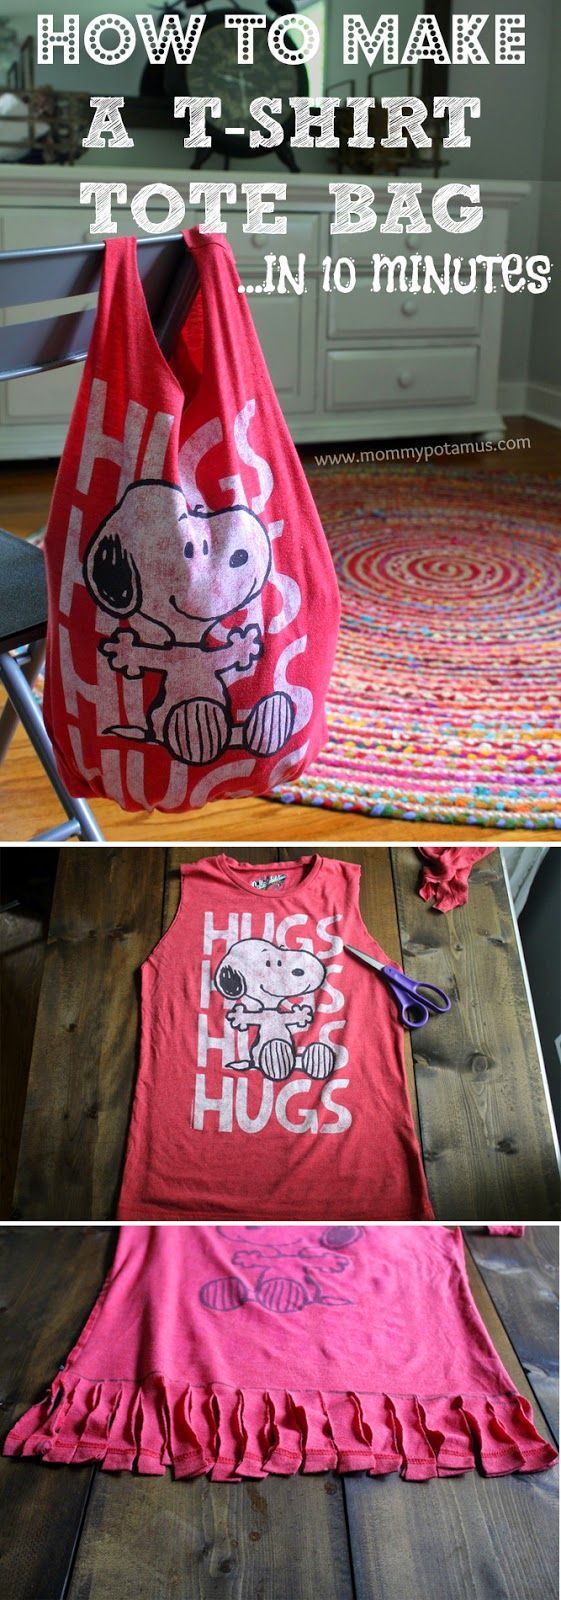 How To Make A No Sew T-Shirt Tote Bag In 10 Minutes -   18 DIY Clothes Rock awesome ideas